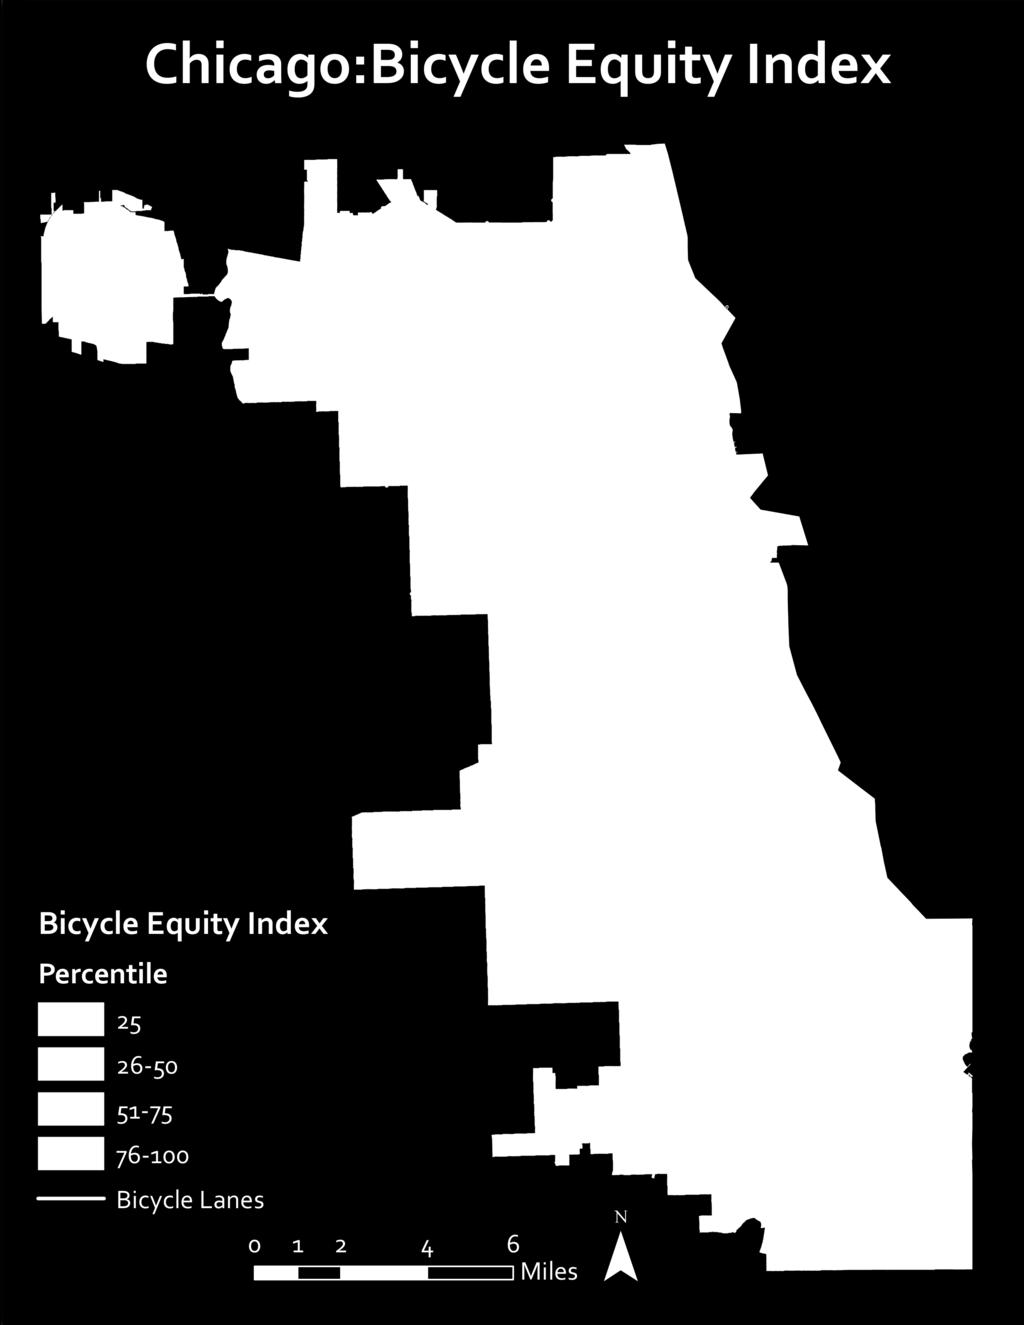 Bicycle Equity Index (BEI) When looking at the socieeconomic characteristics of residents, disadvantaged populations identified by the BEI appear to be located primarily in West Side, Southwest Side,